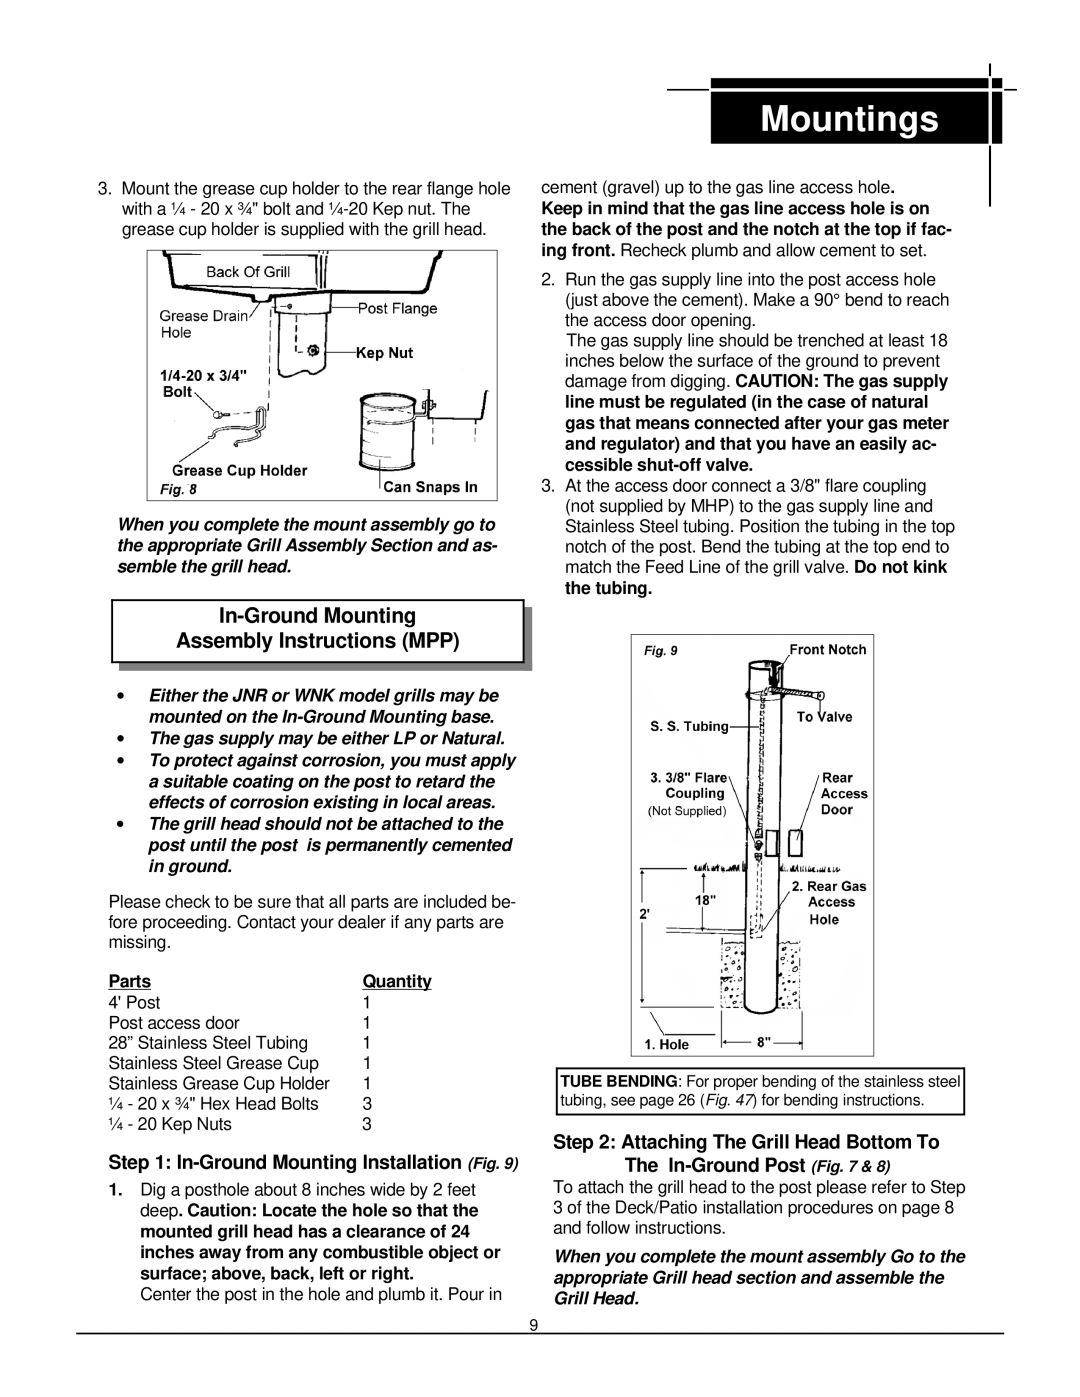 MHP WNK In-Ground Mounting Assembly Instructions MPP, Attaching The Grill Head Bottom To The In-Ground Post, Mountings 